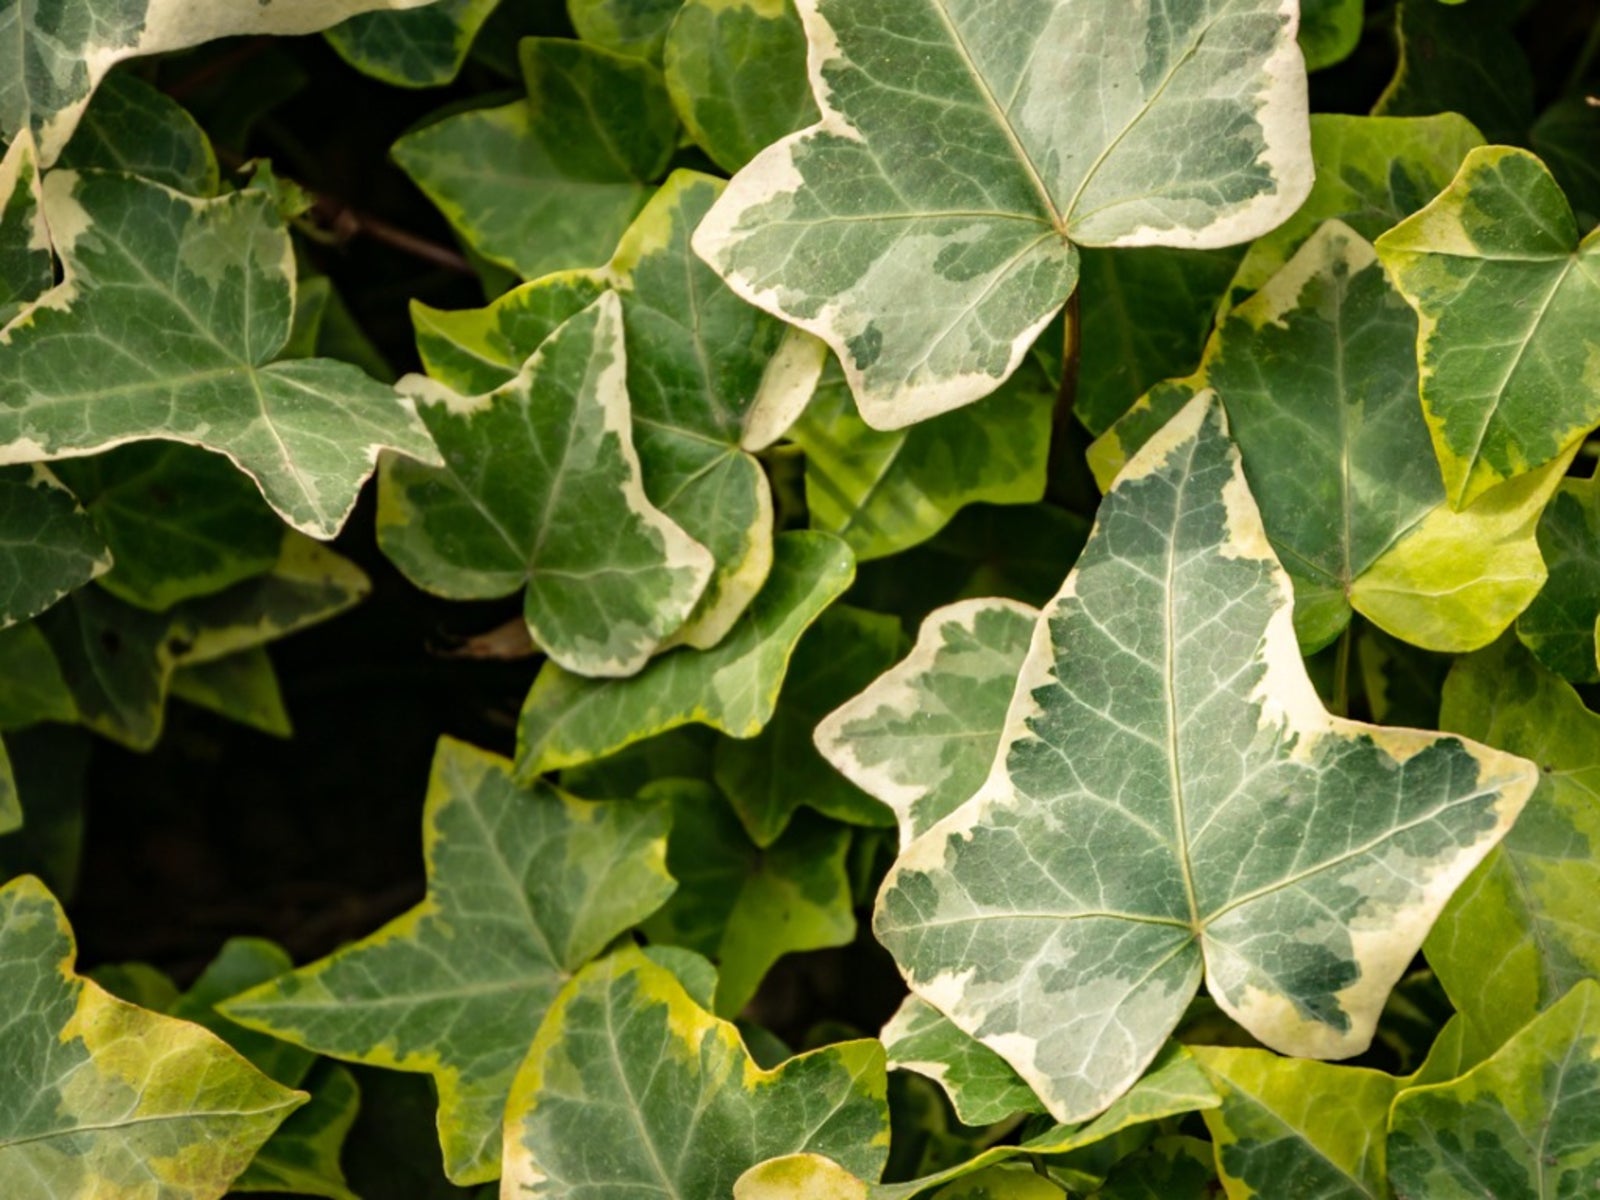 Variegated Ivy Care - Tips To Grow A Healthy Variegated Ivy Plant